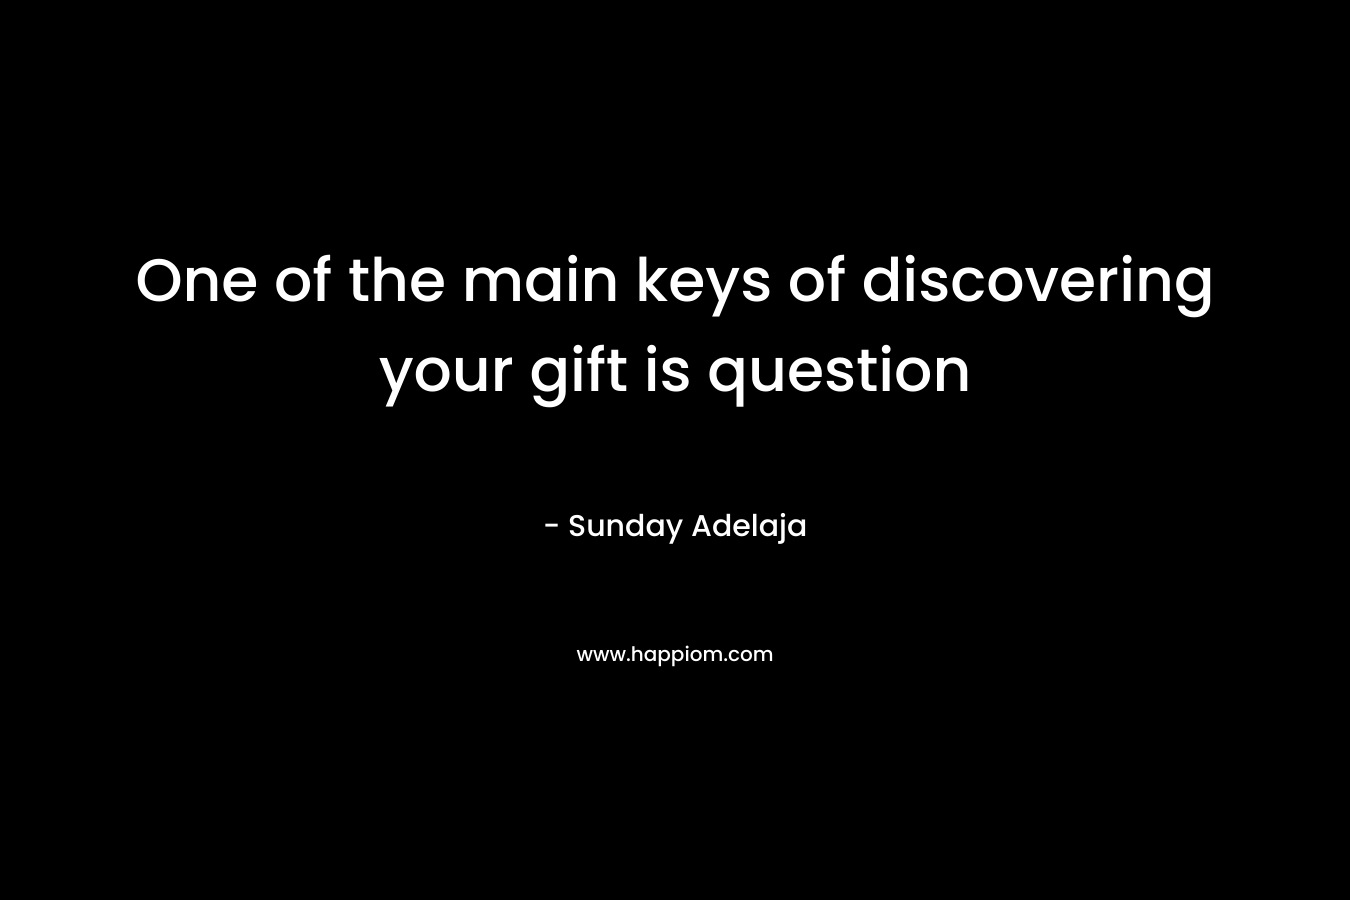 One of the main keys of discovering your gift is question